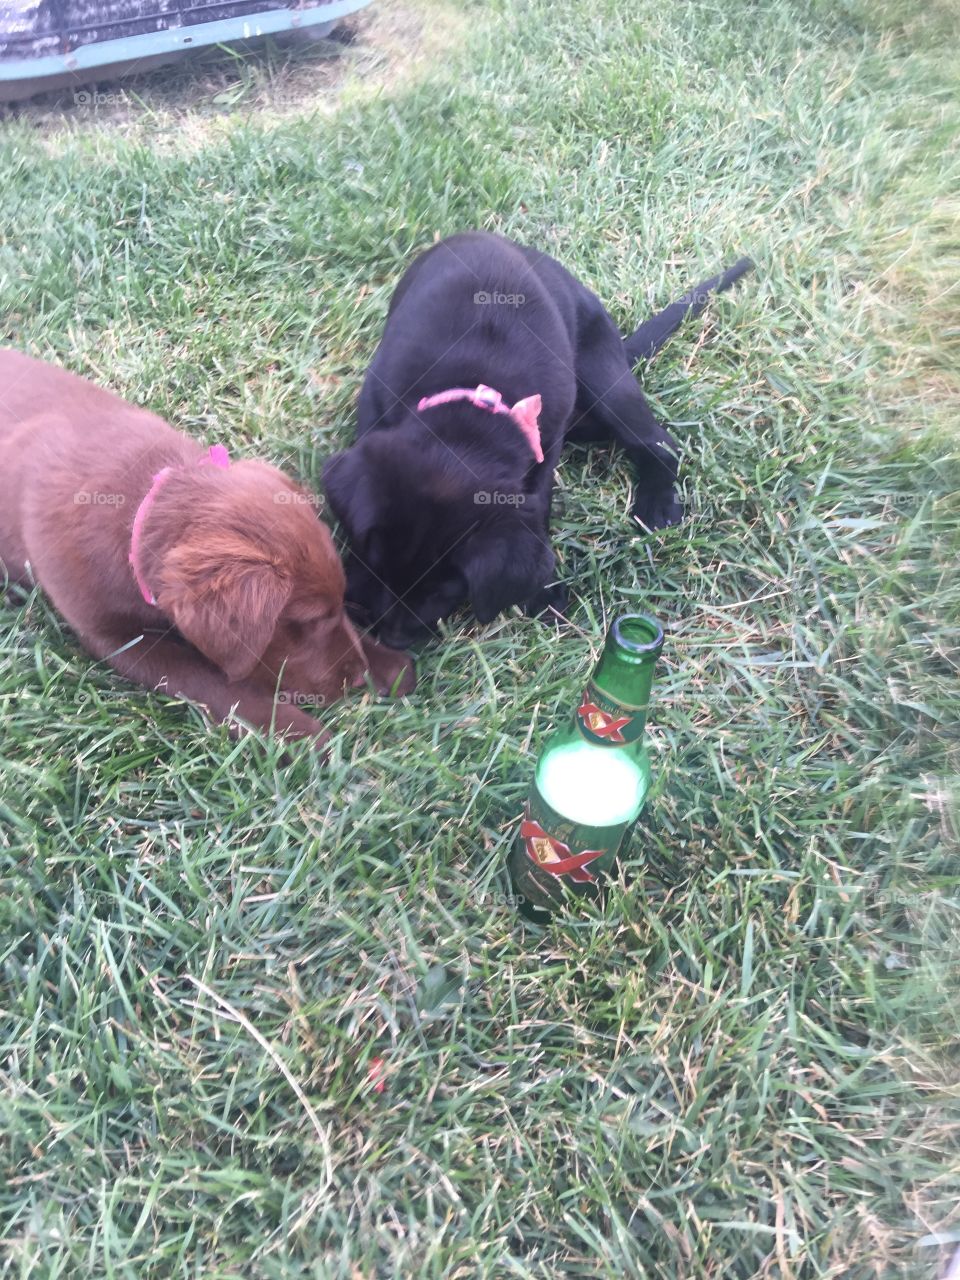 Puppy's looking for beer